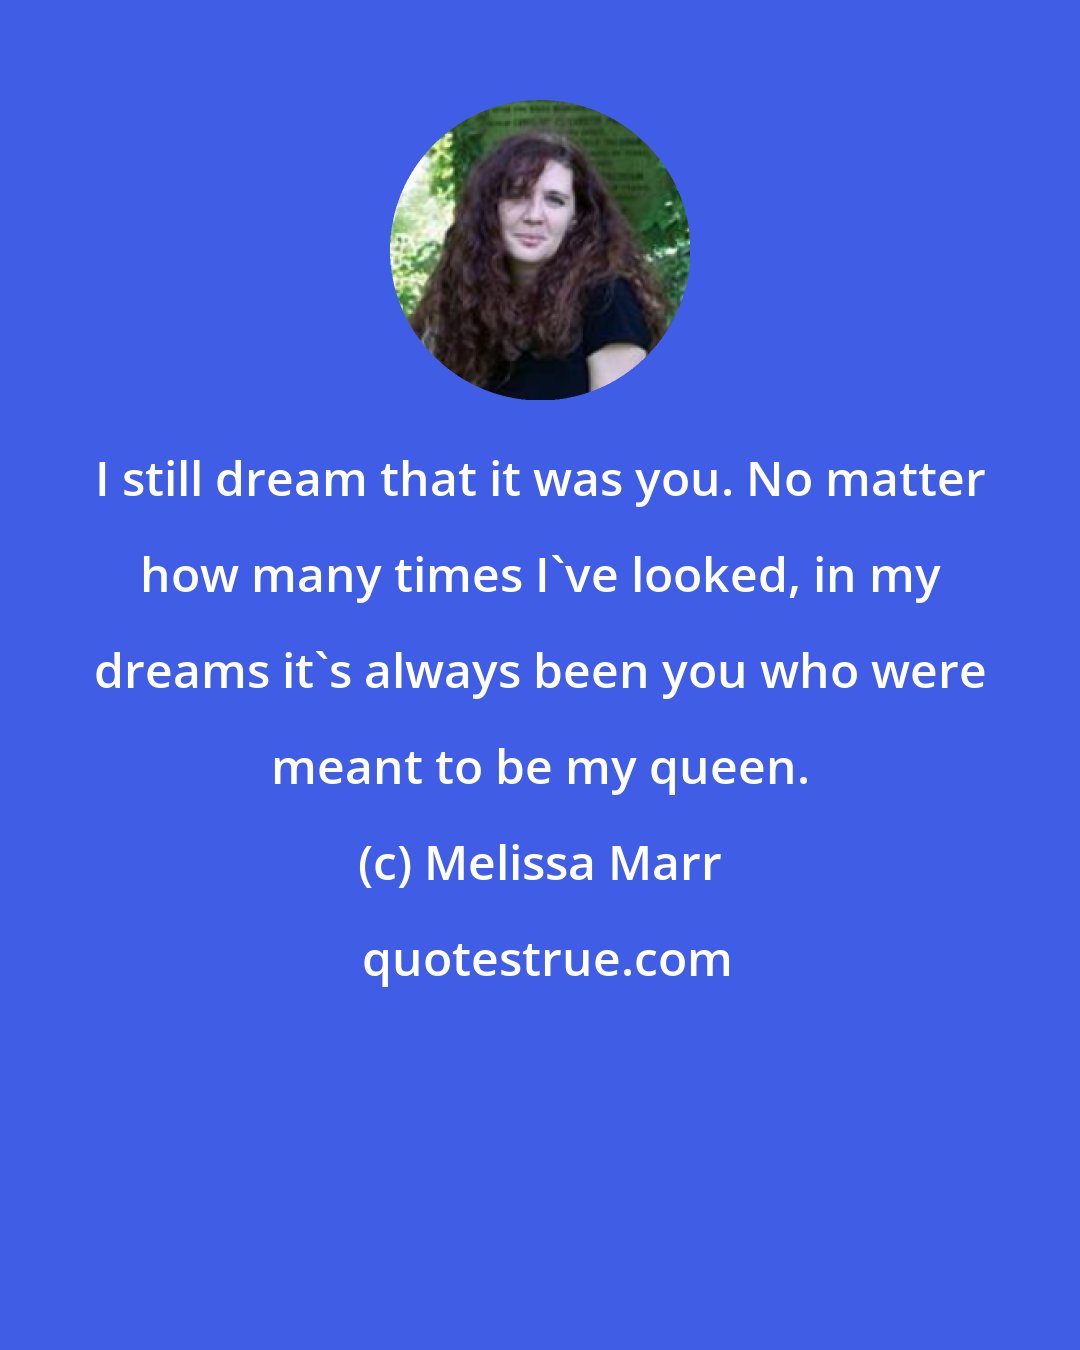 Melissa Marr: I still dream that it was you. No matter how many times I've looked, in my dreams it's always been you who were meant to be my queen.